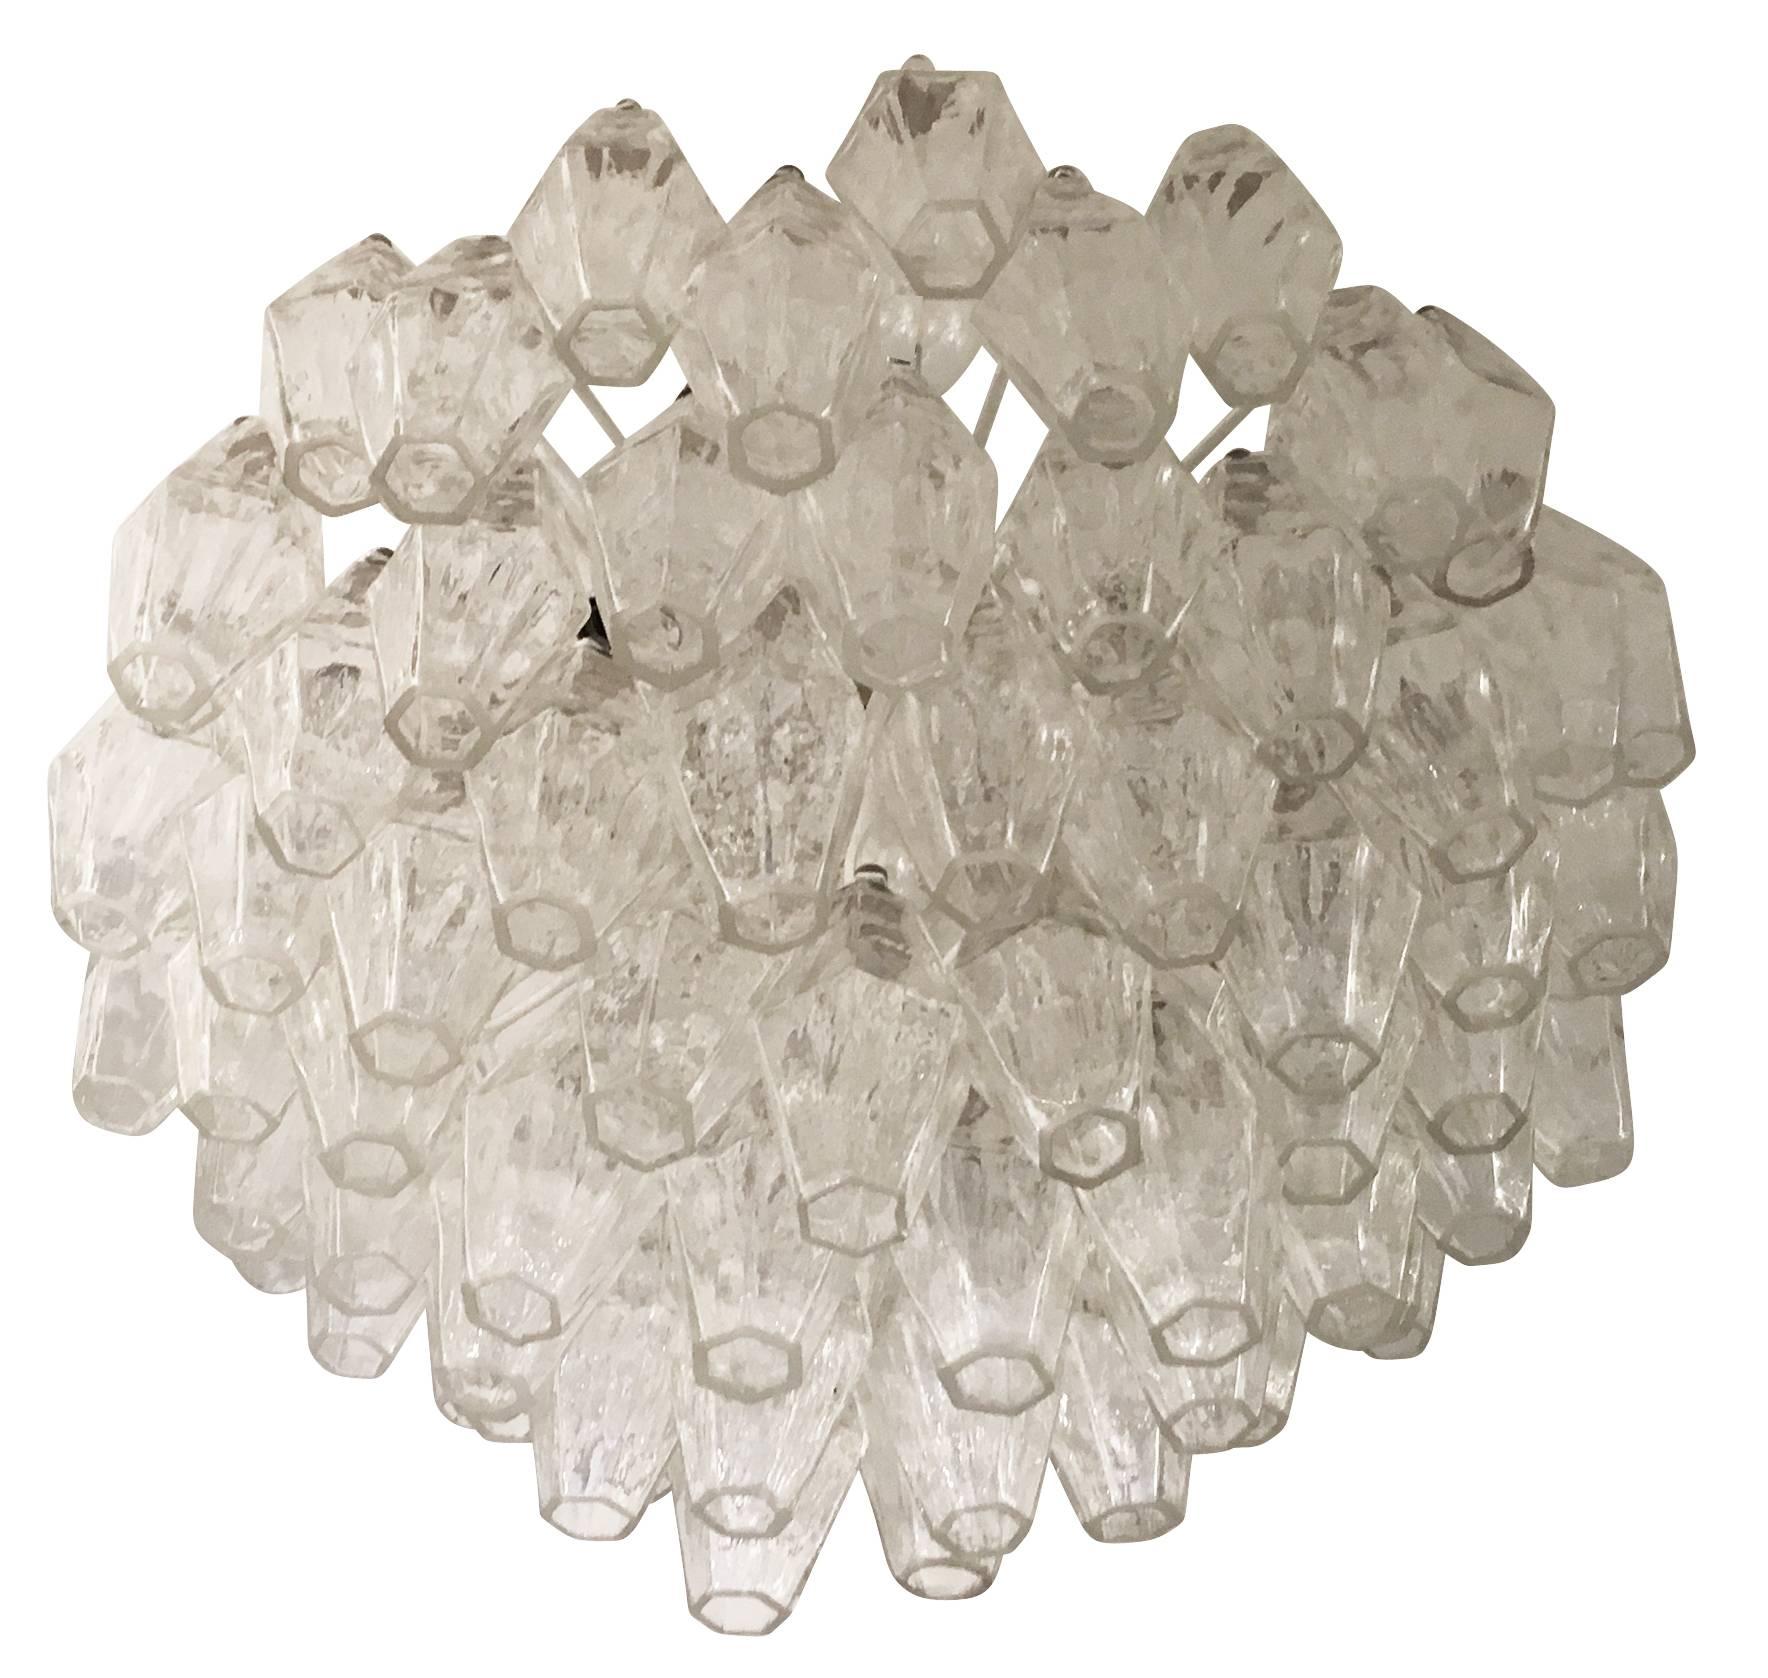 Beautiful polyhedral chandelier by Carlo Scarpa for Venini from the 1960s. It features dozens of clear handblown Murano glasses on four tiers. Adding to the value of this piece are Venini markings on all the arms of the frame. Holds eleven